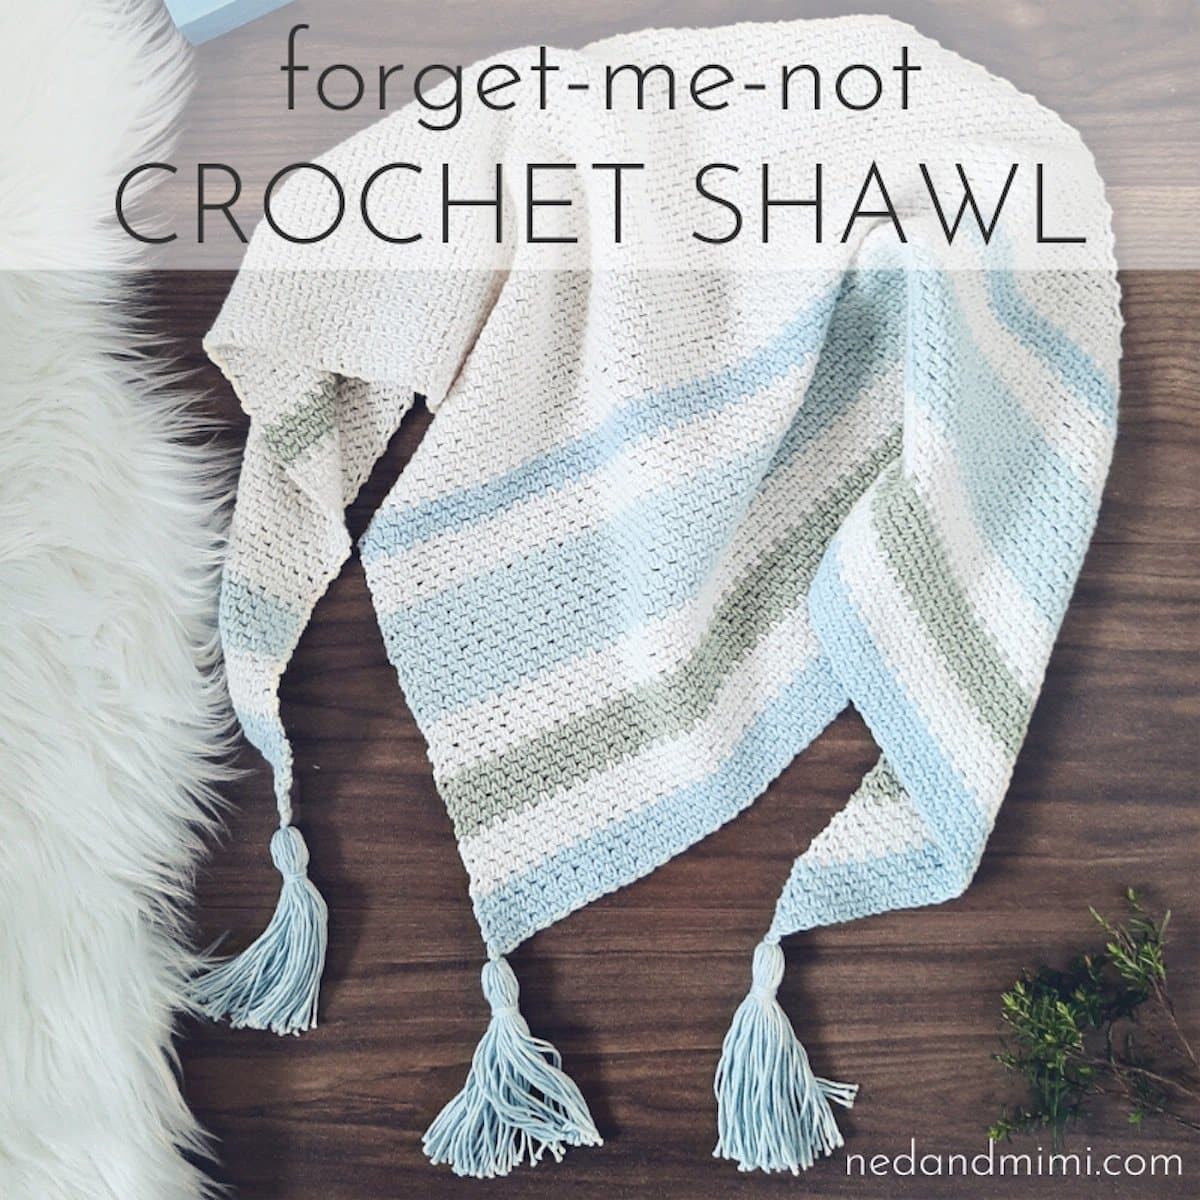 Forget-me-not shawl